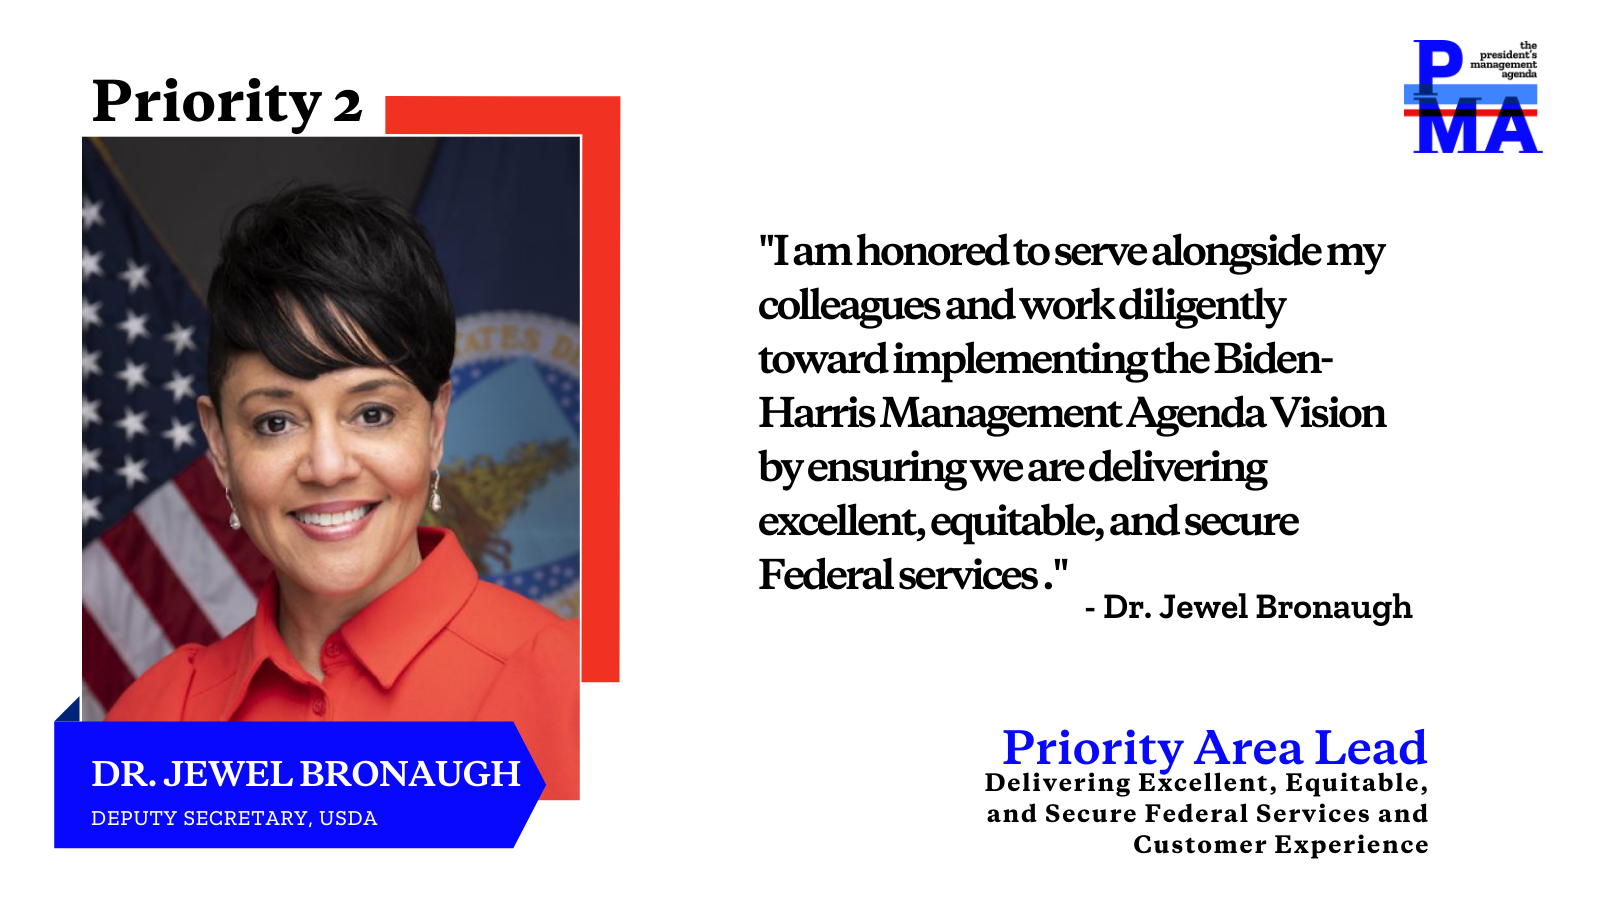 Social card of Dr. Jewel Bronaugh with text: I am honored to serve alongside my colleagues and work diligently toward implementing the Biden-Harris Management Agenda Vision by ensuring we are delivering excellent, equitable, and secure Federal services.